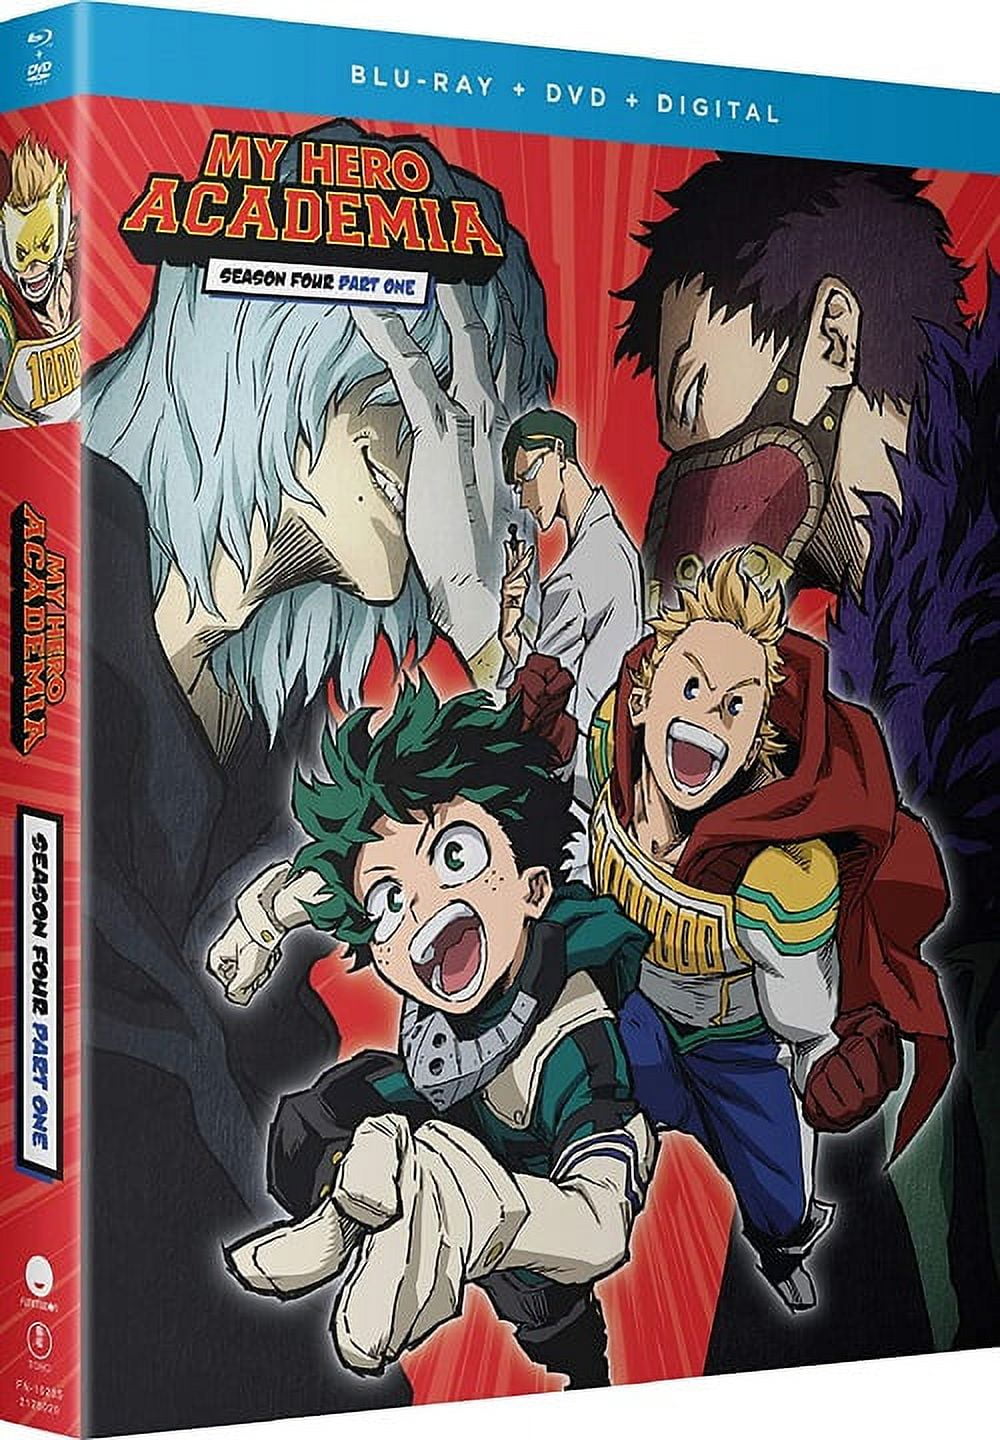 What To Expect From My Hero Academia Season 4 